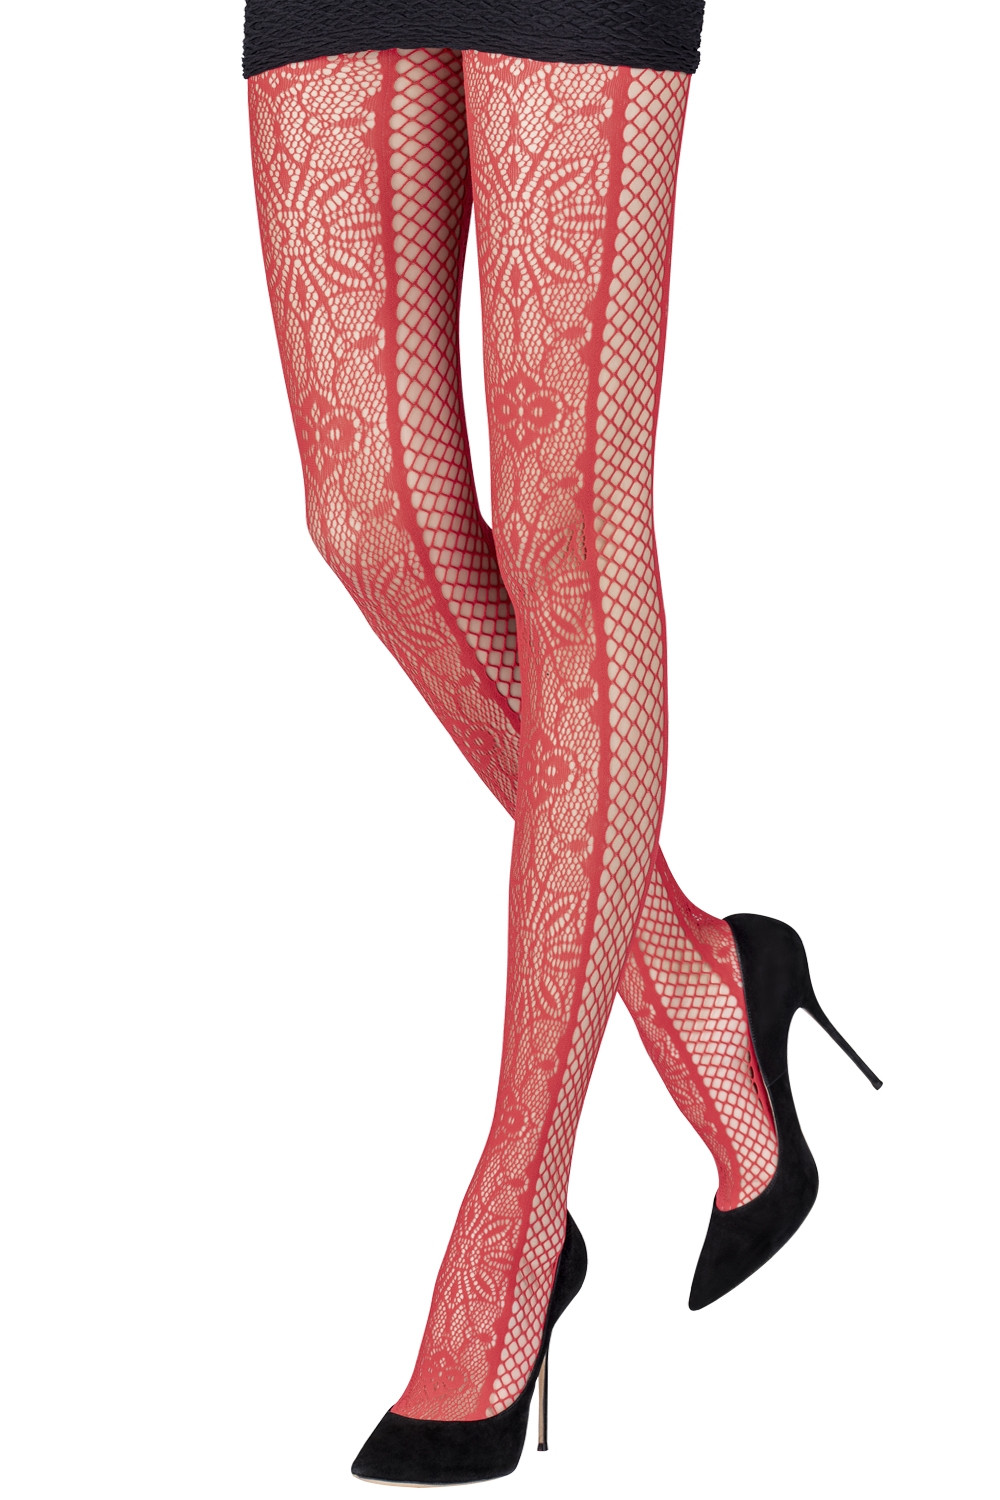 Butterfly Lace Footless Fishnet Tights March 2023 Group Gift by